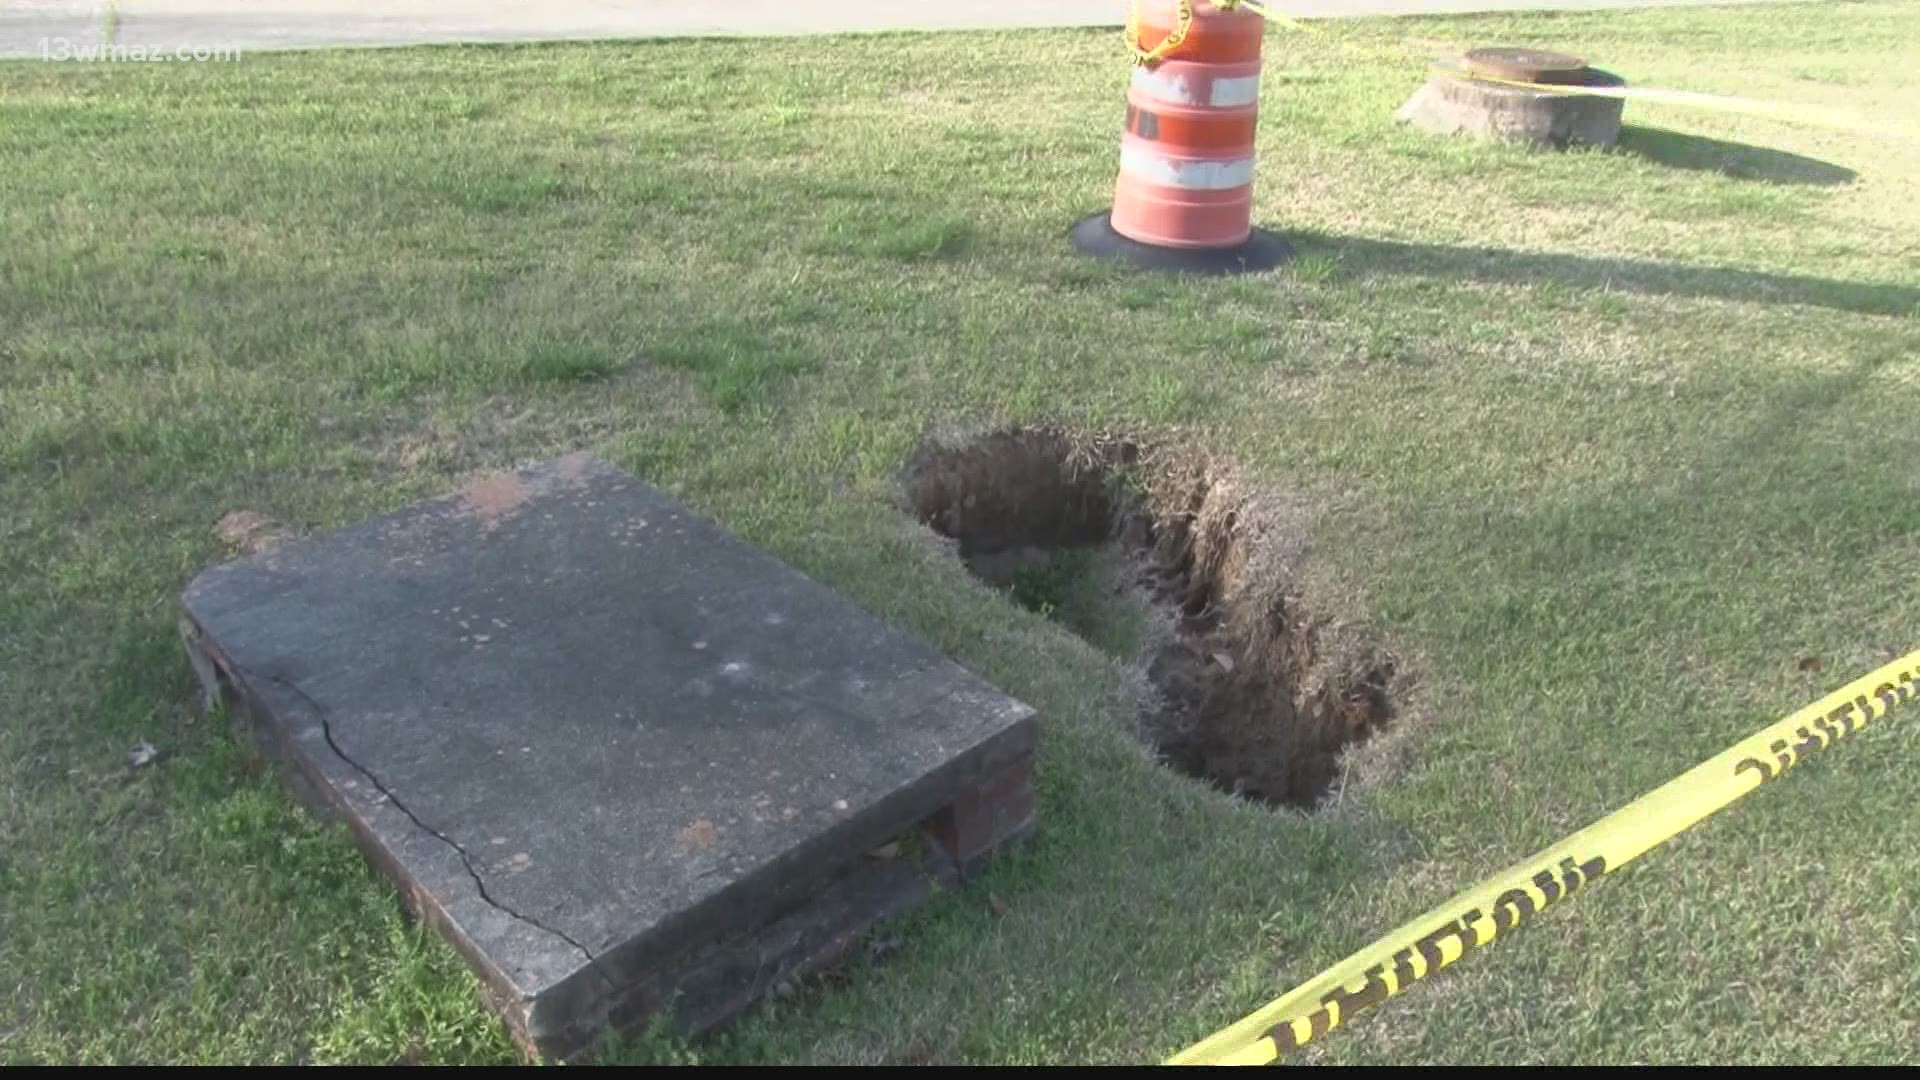 Mark Brown said he first noticed a gaping hole next to the storm drain in his front yard last month